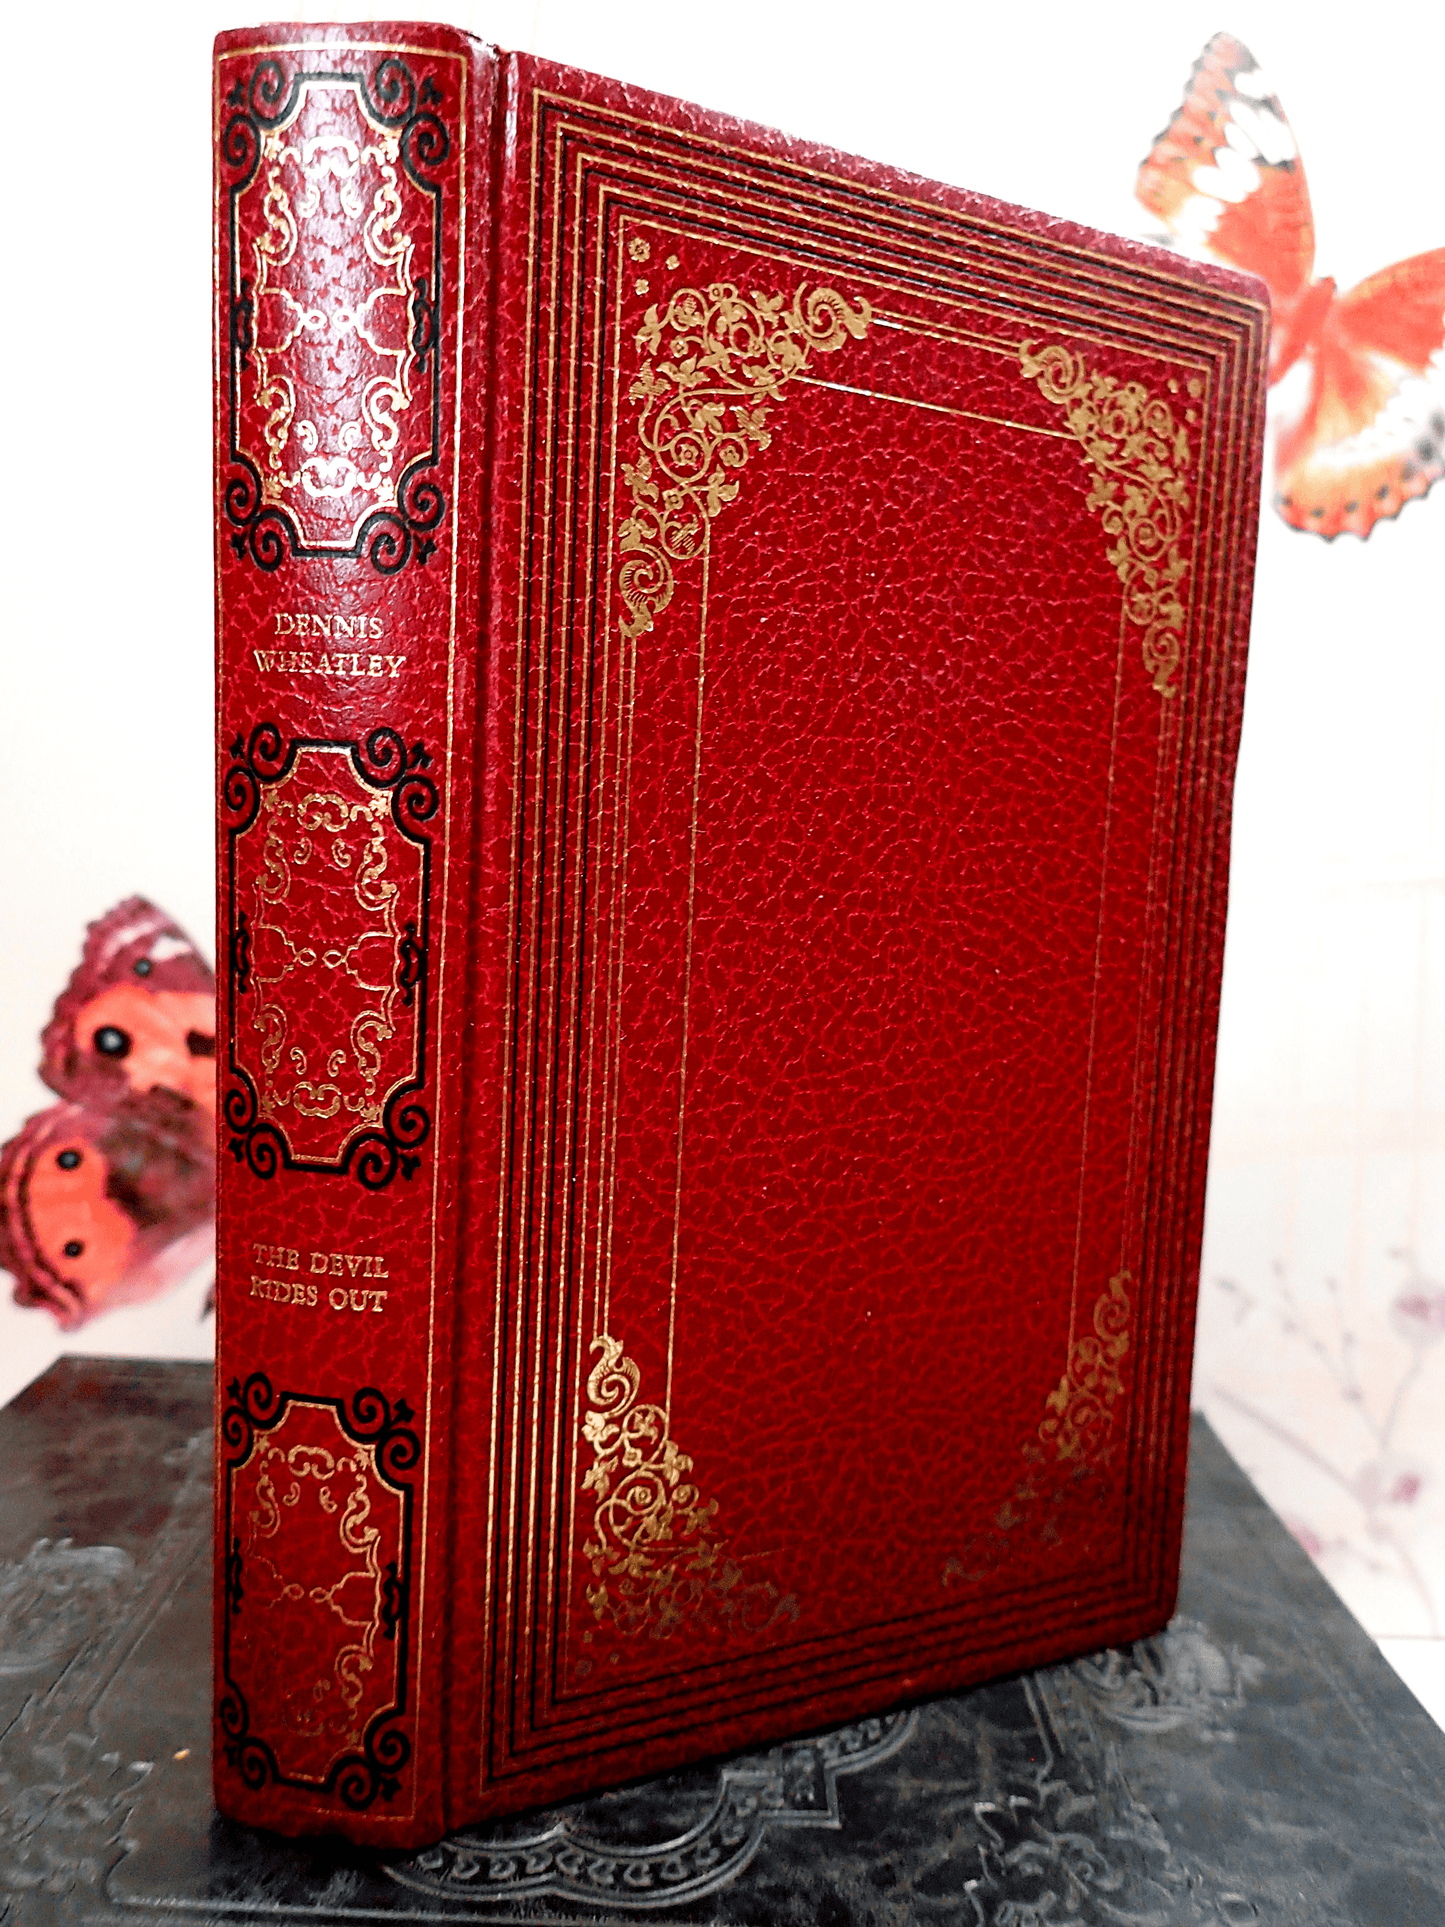 The Devil Rides Red, black and gilt decorated Dennis Wheatley with vegan Leather binding.